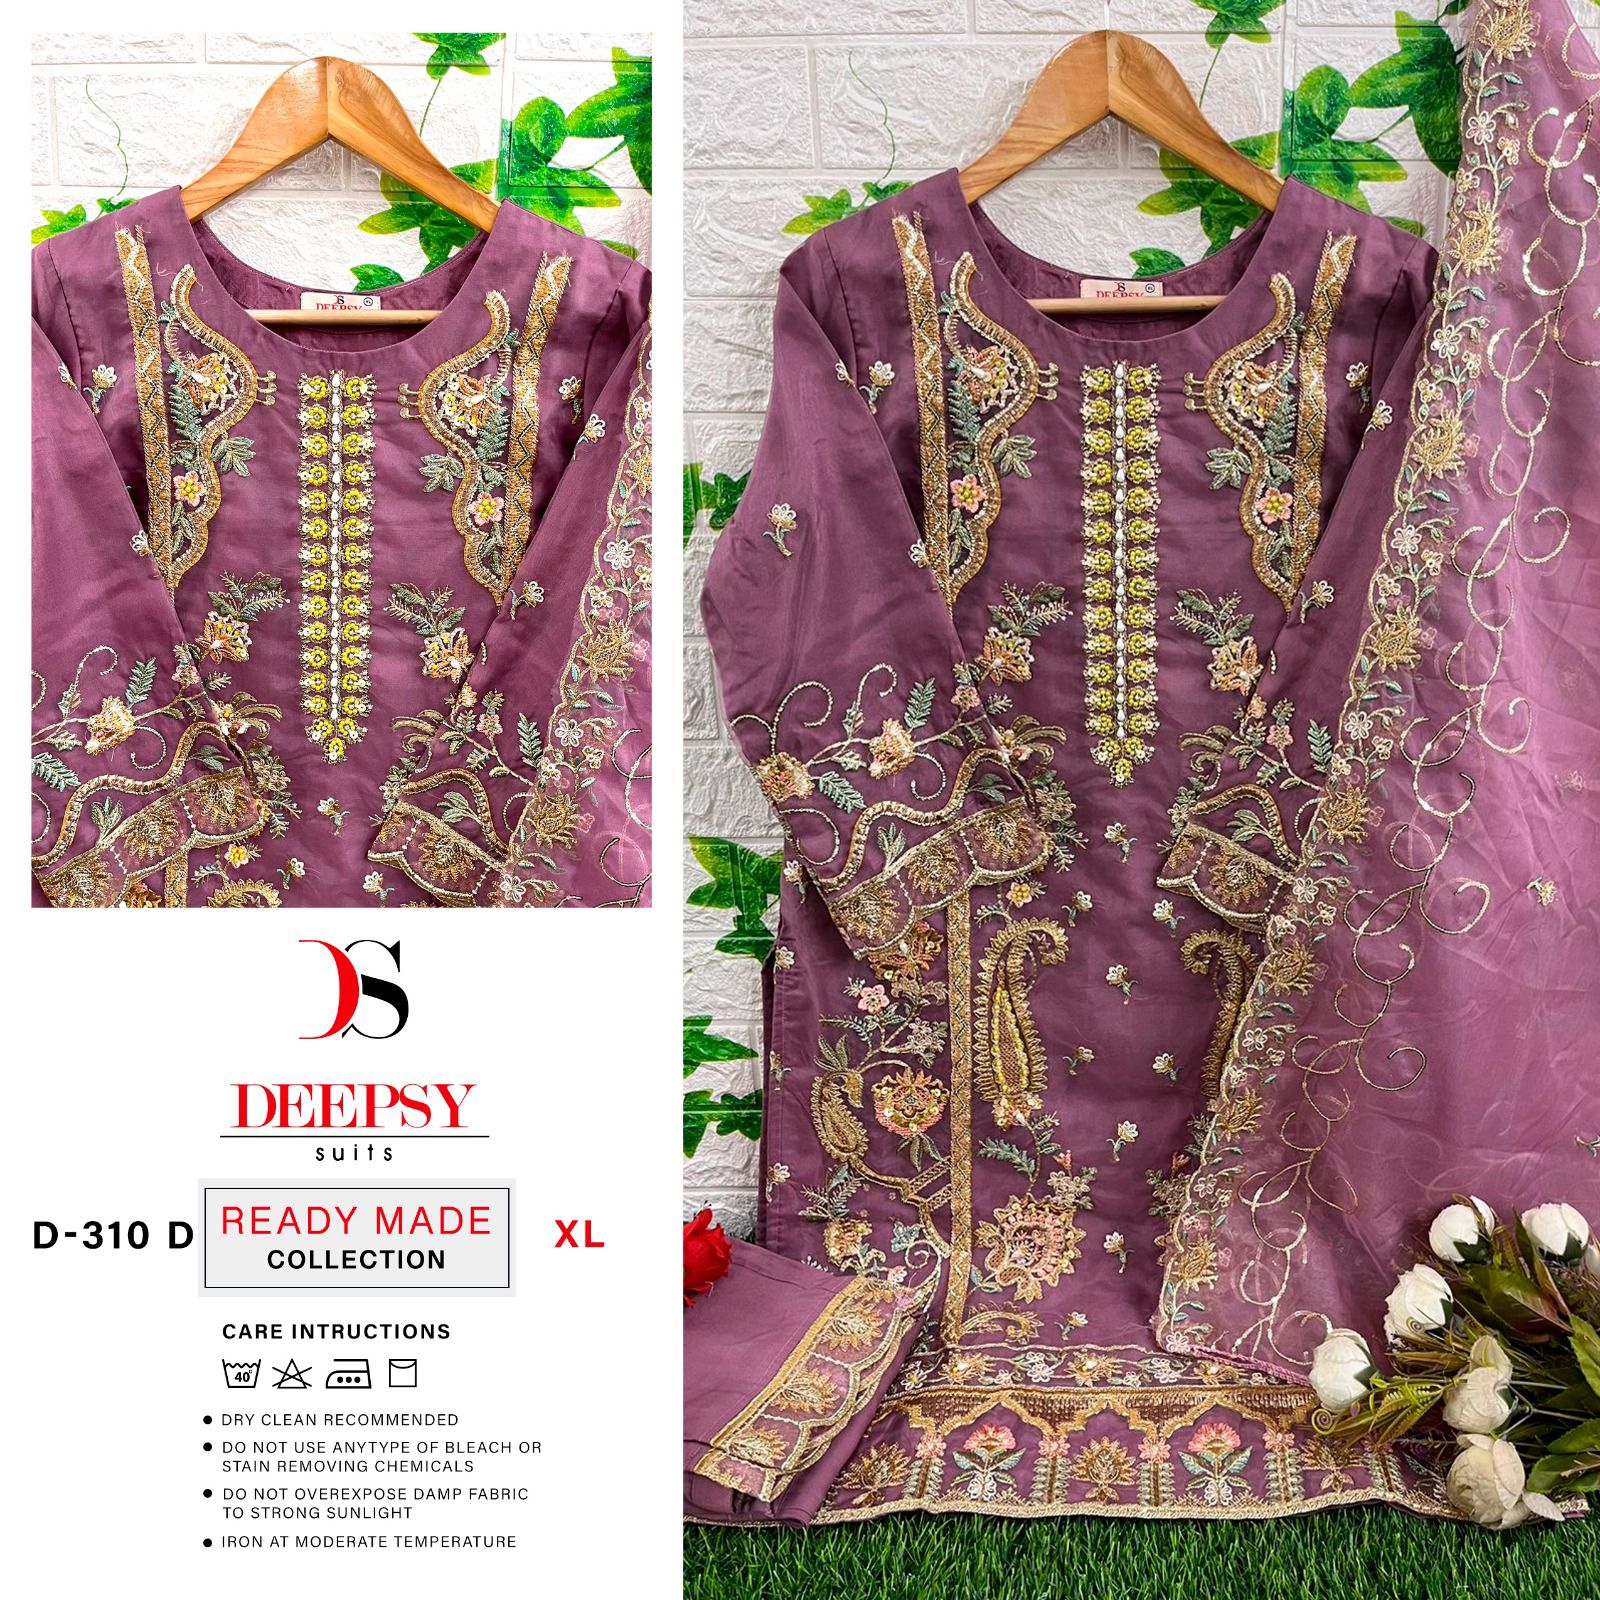 DEEPSY SUITS D 310 D READYMADE SUITS IN INDIA